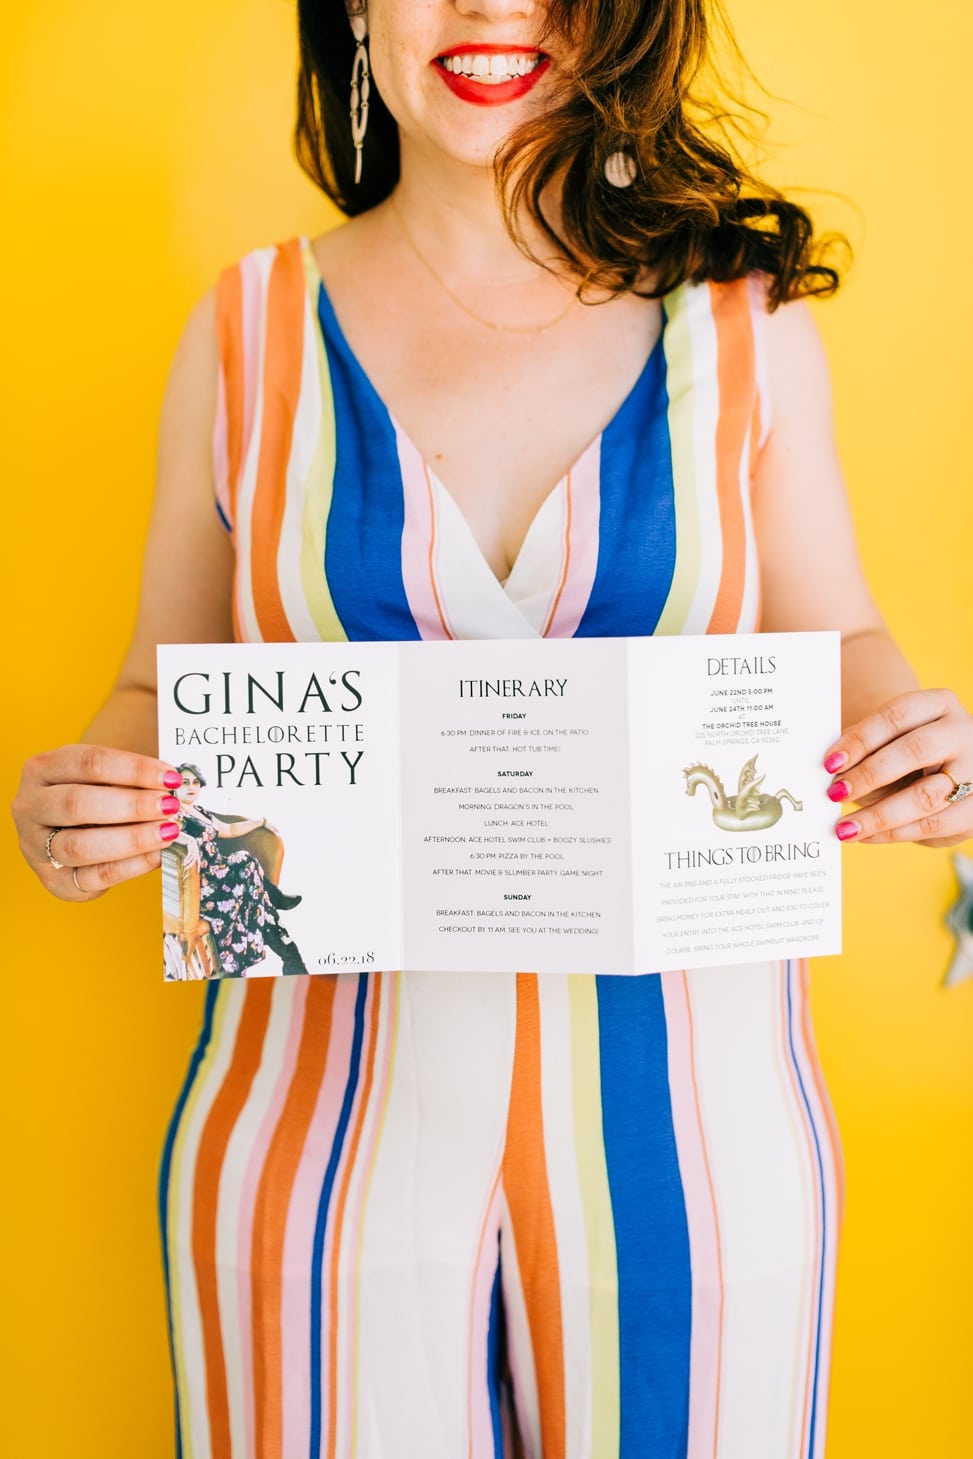 A woman in a striped jumpsuit smiles and holds a tri-fold full-color itinerary that reads "Gina's Bachelorette Party"